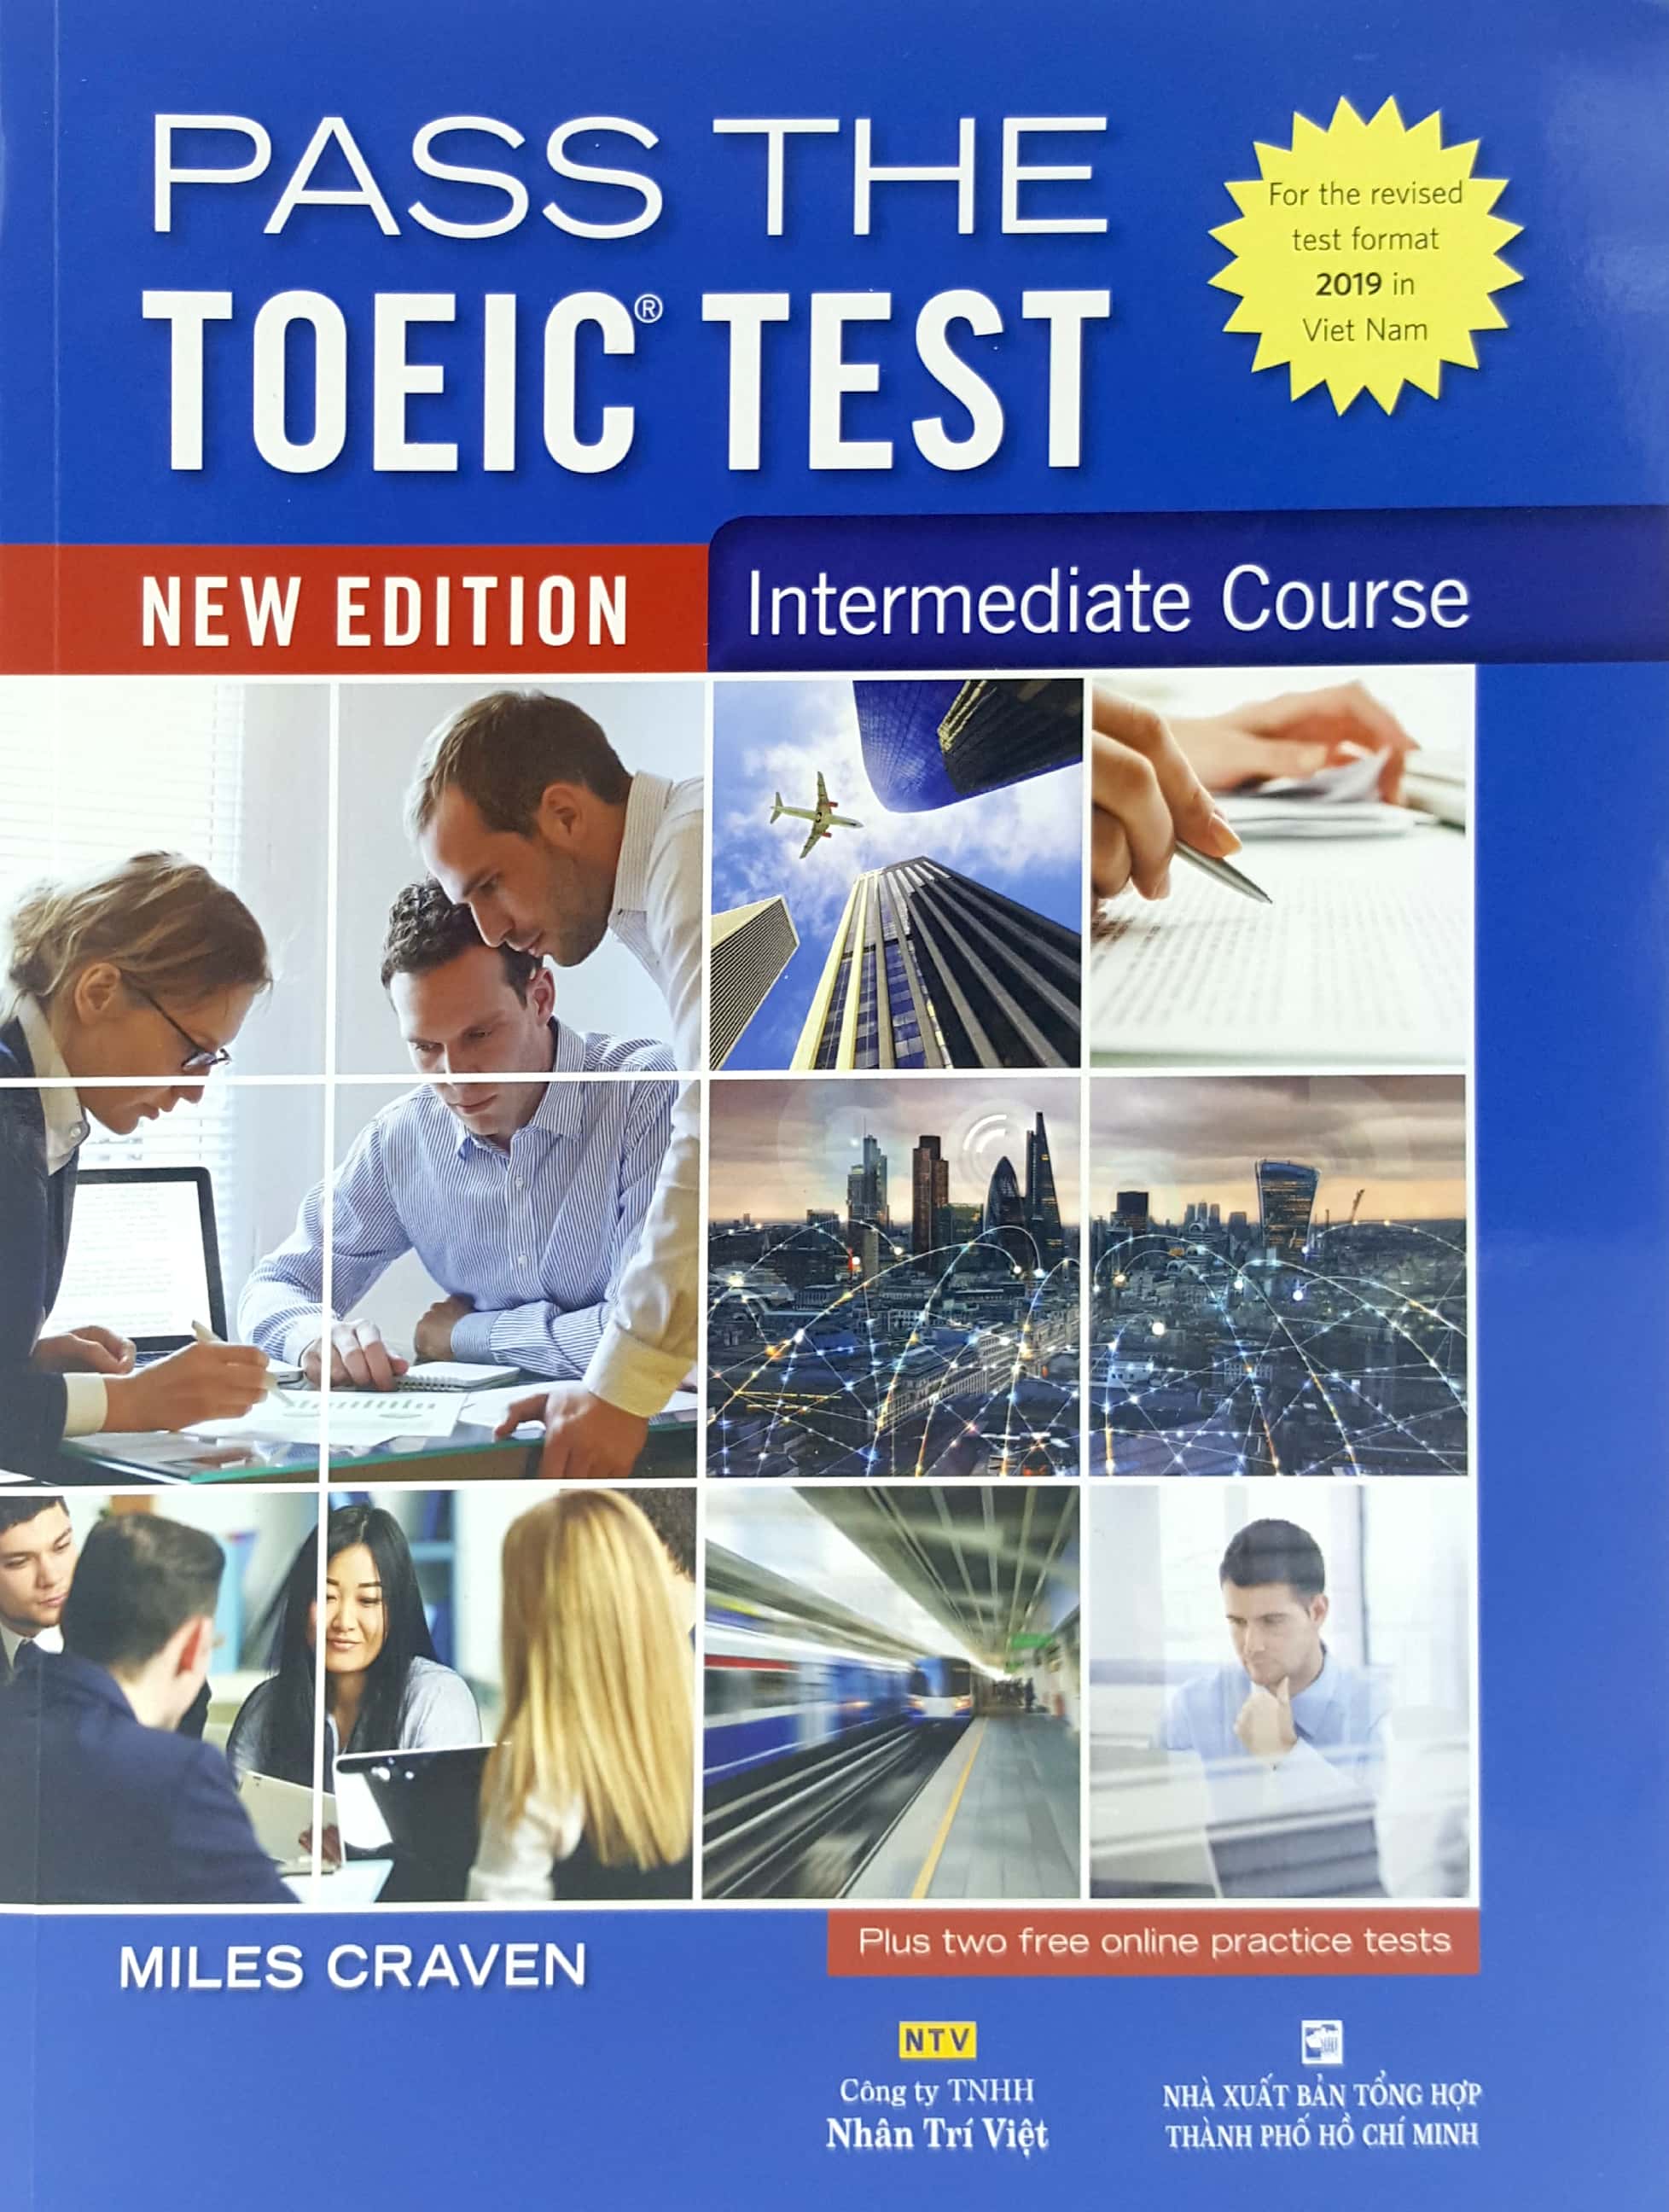 Pass The Toeic Test - Intermediate Course New Edition PDF